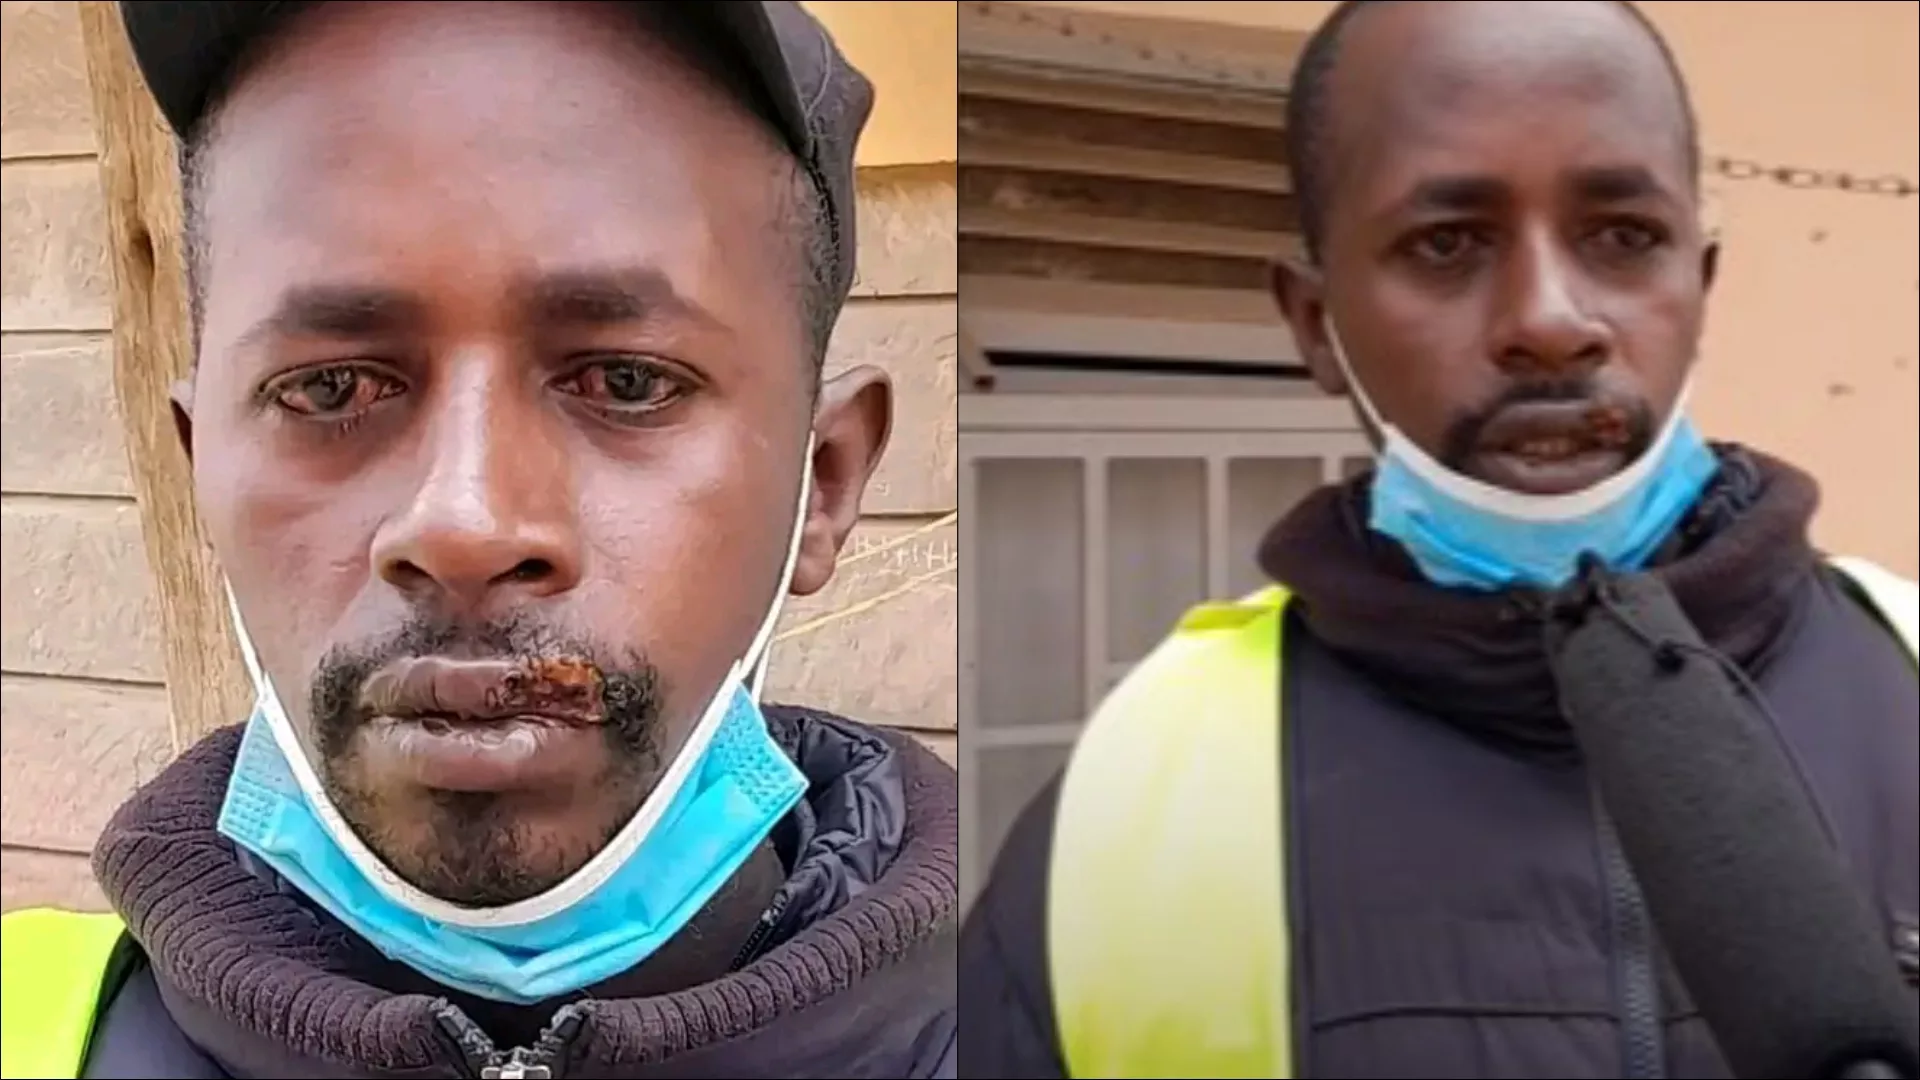 A male Bodaboda rider has narrated how his client bit his lip after he refused to have 'twa twa' with him. Antony Mwangi who hails from Roysambu is nursing injuries following the painful incidence that saw part of his upper lip off. While speaking to Paxson Tv, Antony Mwangi said that got a client on Friday evening. The client requested to be dropped at a place called Zebra in Zimmerman. On reaching the destination, the client said that he did not have any cash. The client instructed him to accompany him to the his apartment to collect his dues. Unaware of what was awaiting, the rider followed the client to his room which was on the third floor. At first, the client was very hospitable. He even requested Anthony to sit down for some refreshments. When Antony declined the offer, the client became very hostile. He immediately snatched the phone from Antony and ordered him to bend over for a twatwa session Efforts by Mwangi to resist the heinous act made the client more aggressive. He jumped on him in an attempted to kiss him and ended bitting off his upper lip. Mwangi screamed and cried for help prompting neighbors to run to the scene. They offered first aid before calling the police officer. Upon arrival at the scene, the police officers arrested the client and took him to Kasarani police station